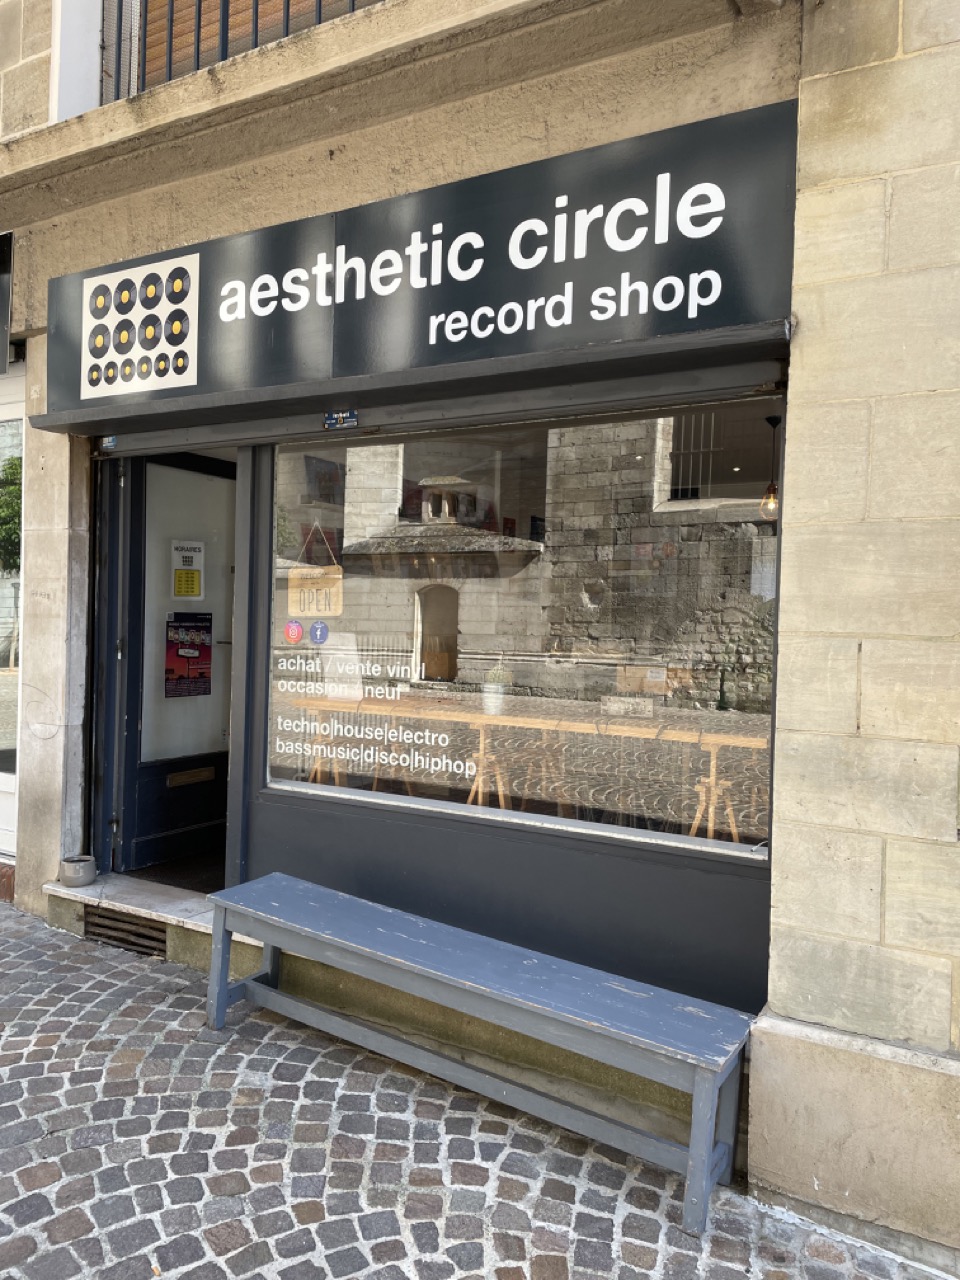 Aesthetic Circle Record Shop - 3 of 3